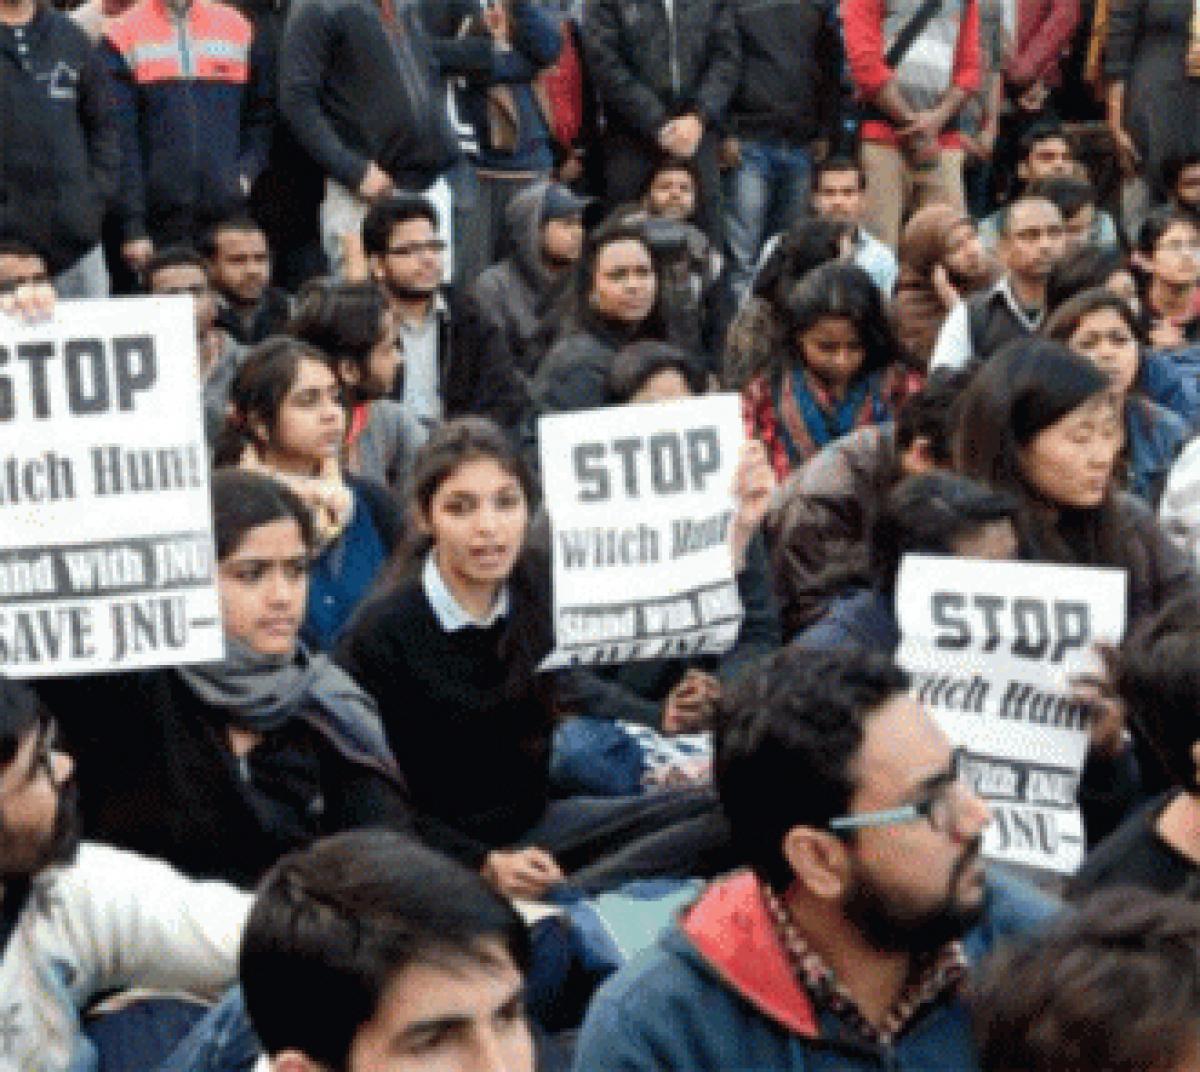 JNU students get support from Indian Americans